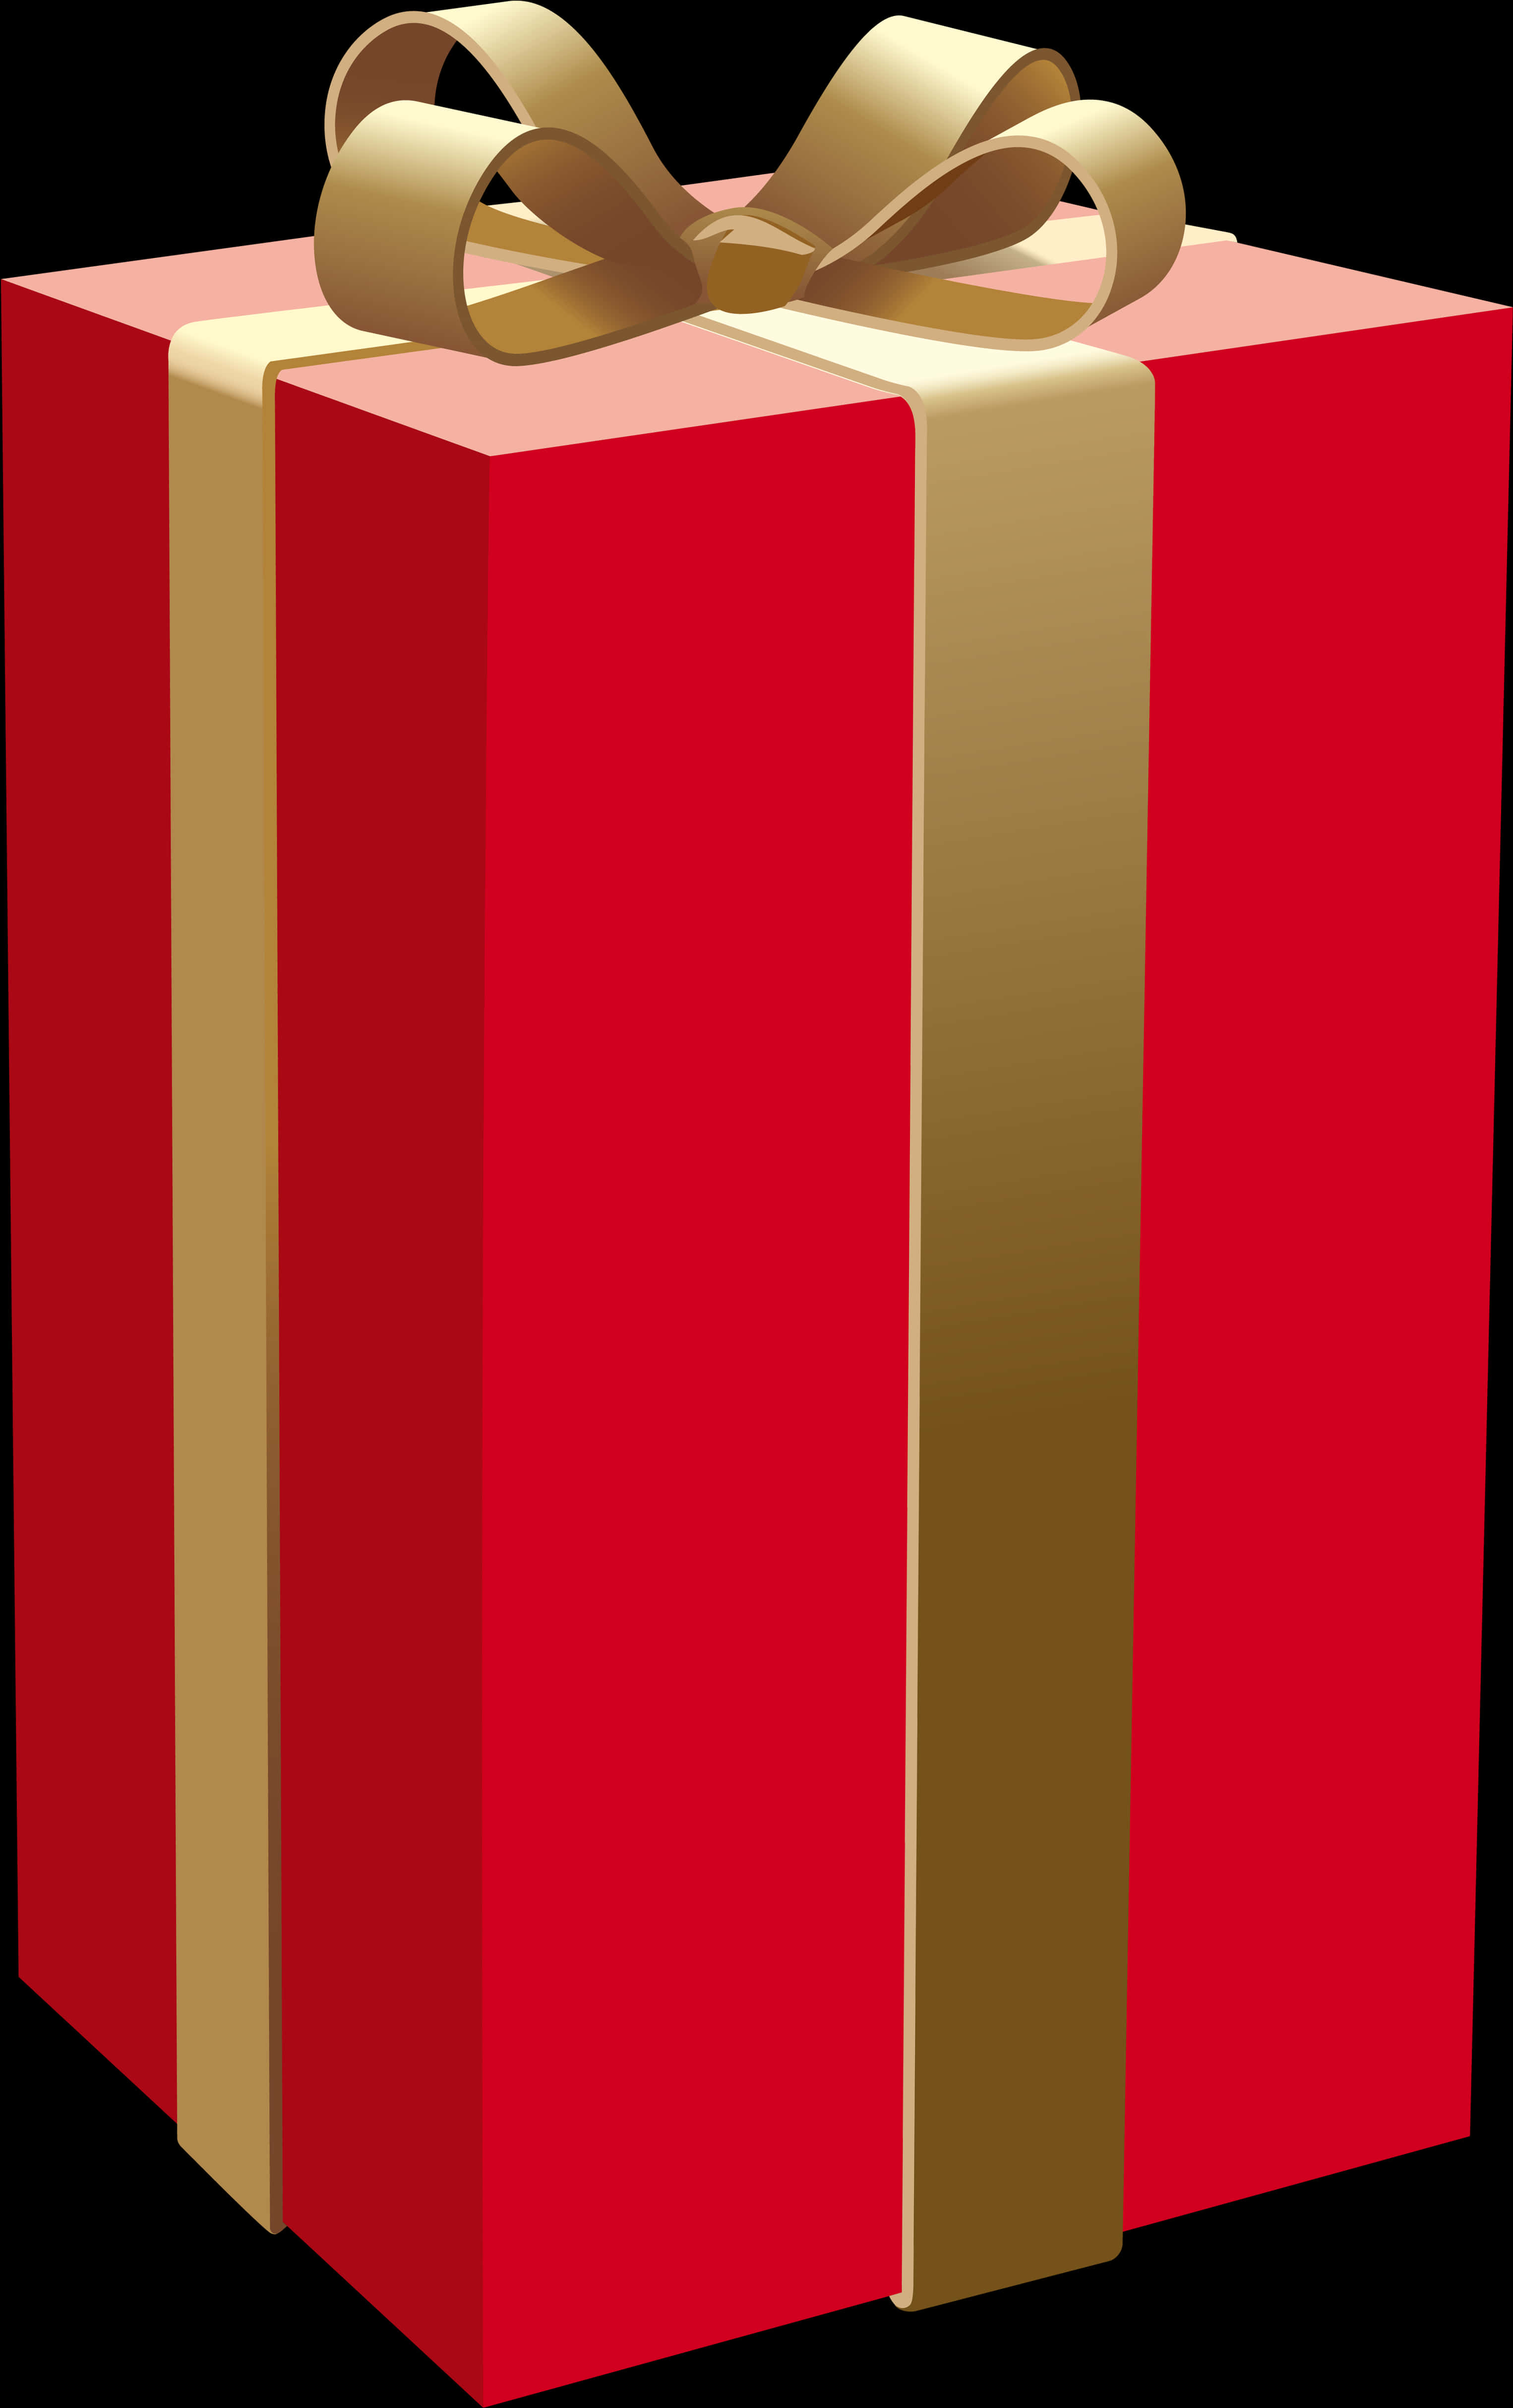 A Red And Gold Striped Box